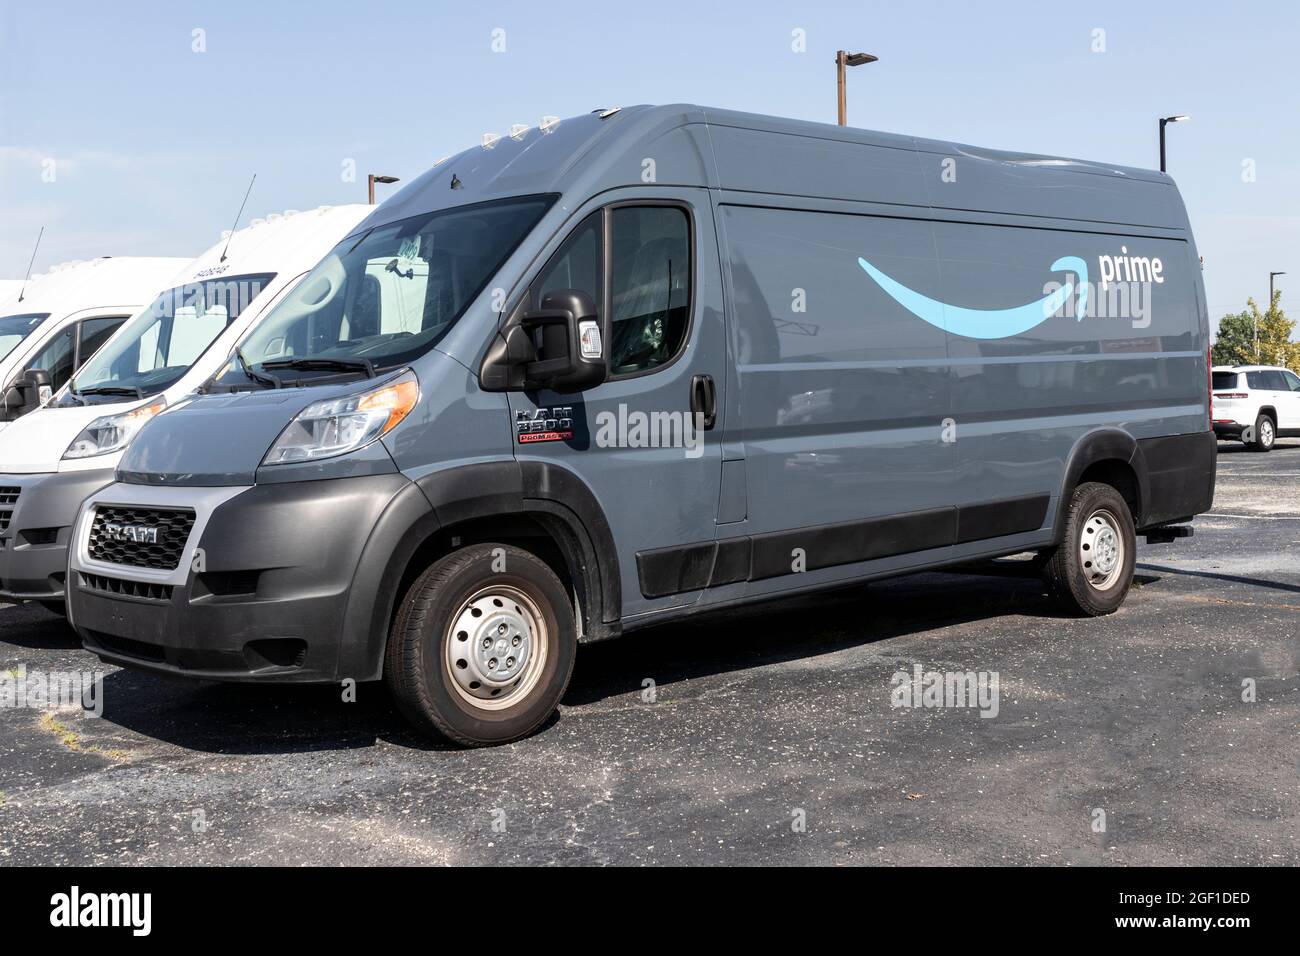 Indianapolis - Circa August 2021: Amazon Prime delivery van. Amazon.com is  getting In the delivery business With Prime branded vans Stock Photo - Alamy